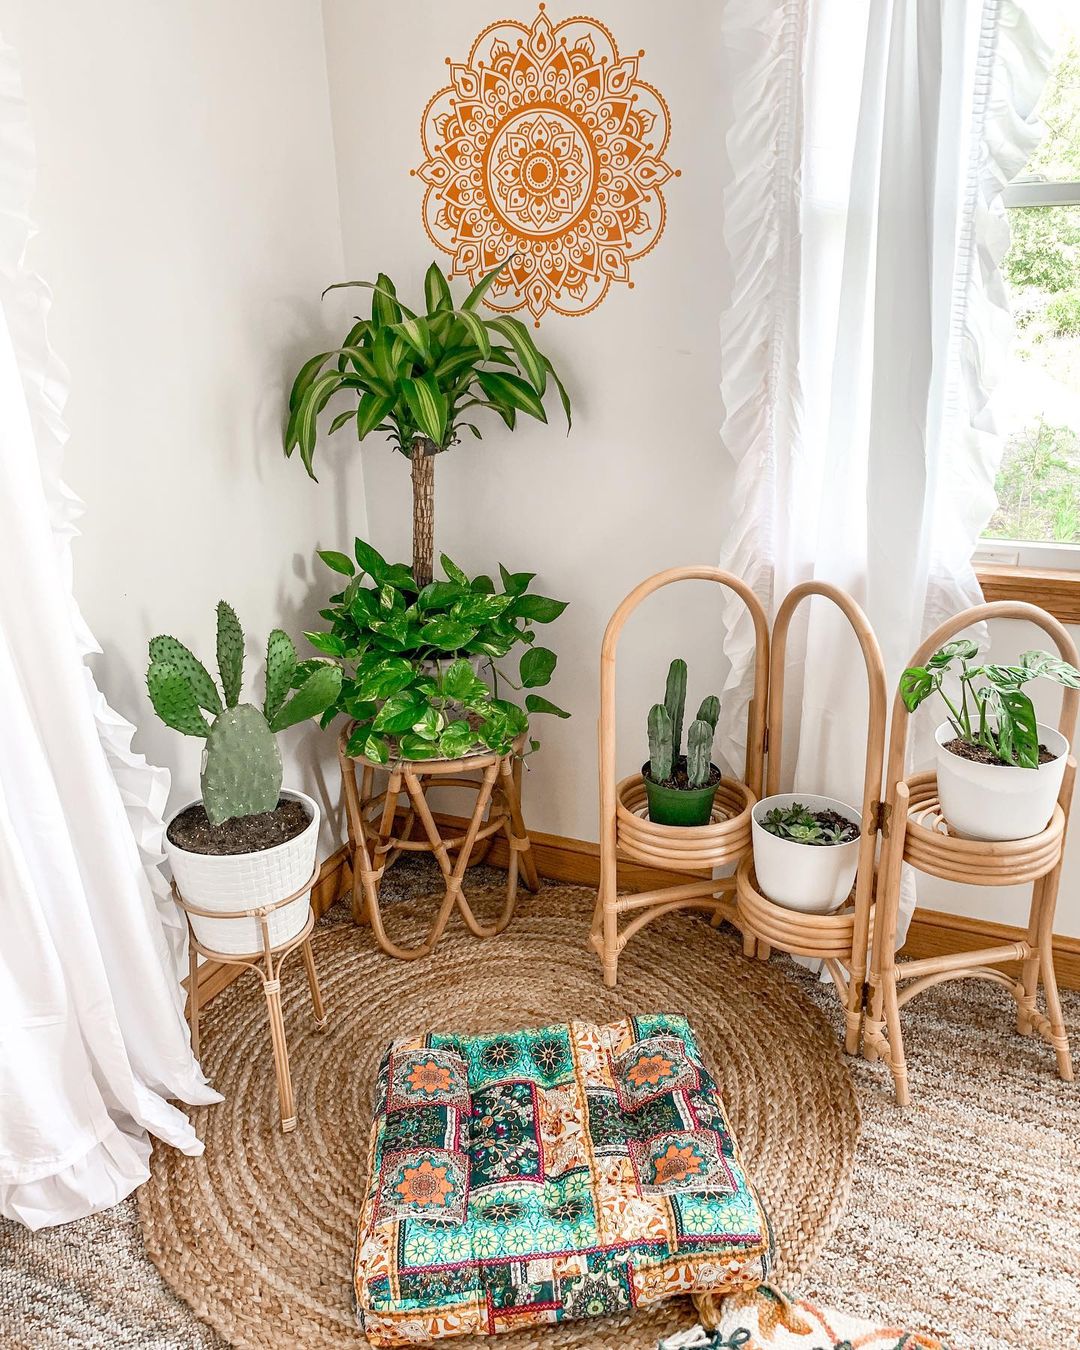 Meditation corner with potted plants and a white curtain over the walls. Photo by Instagram user @chloe_xandria